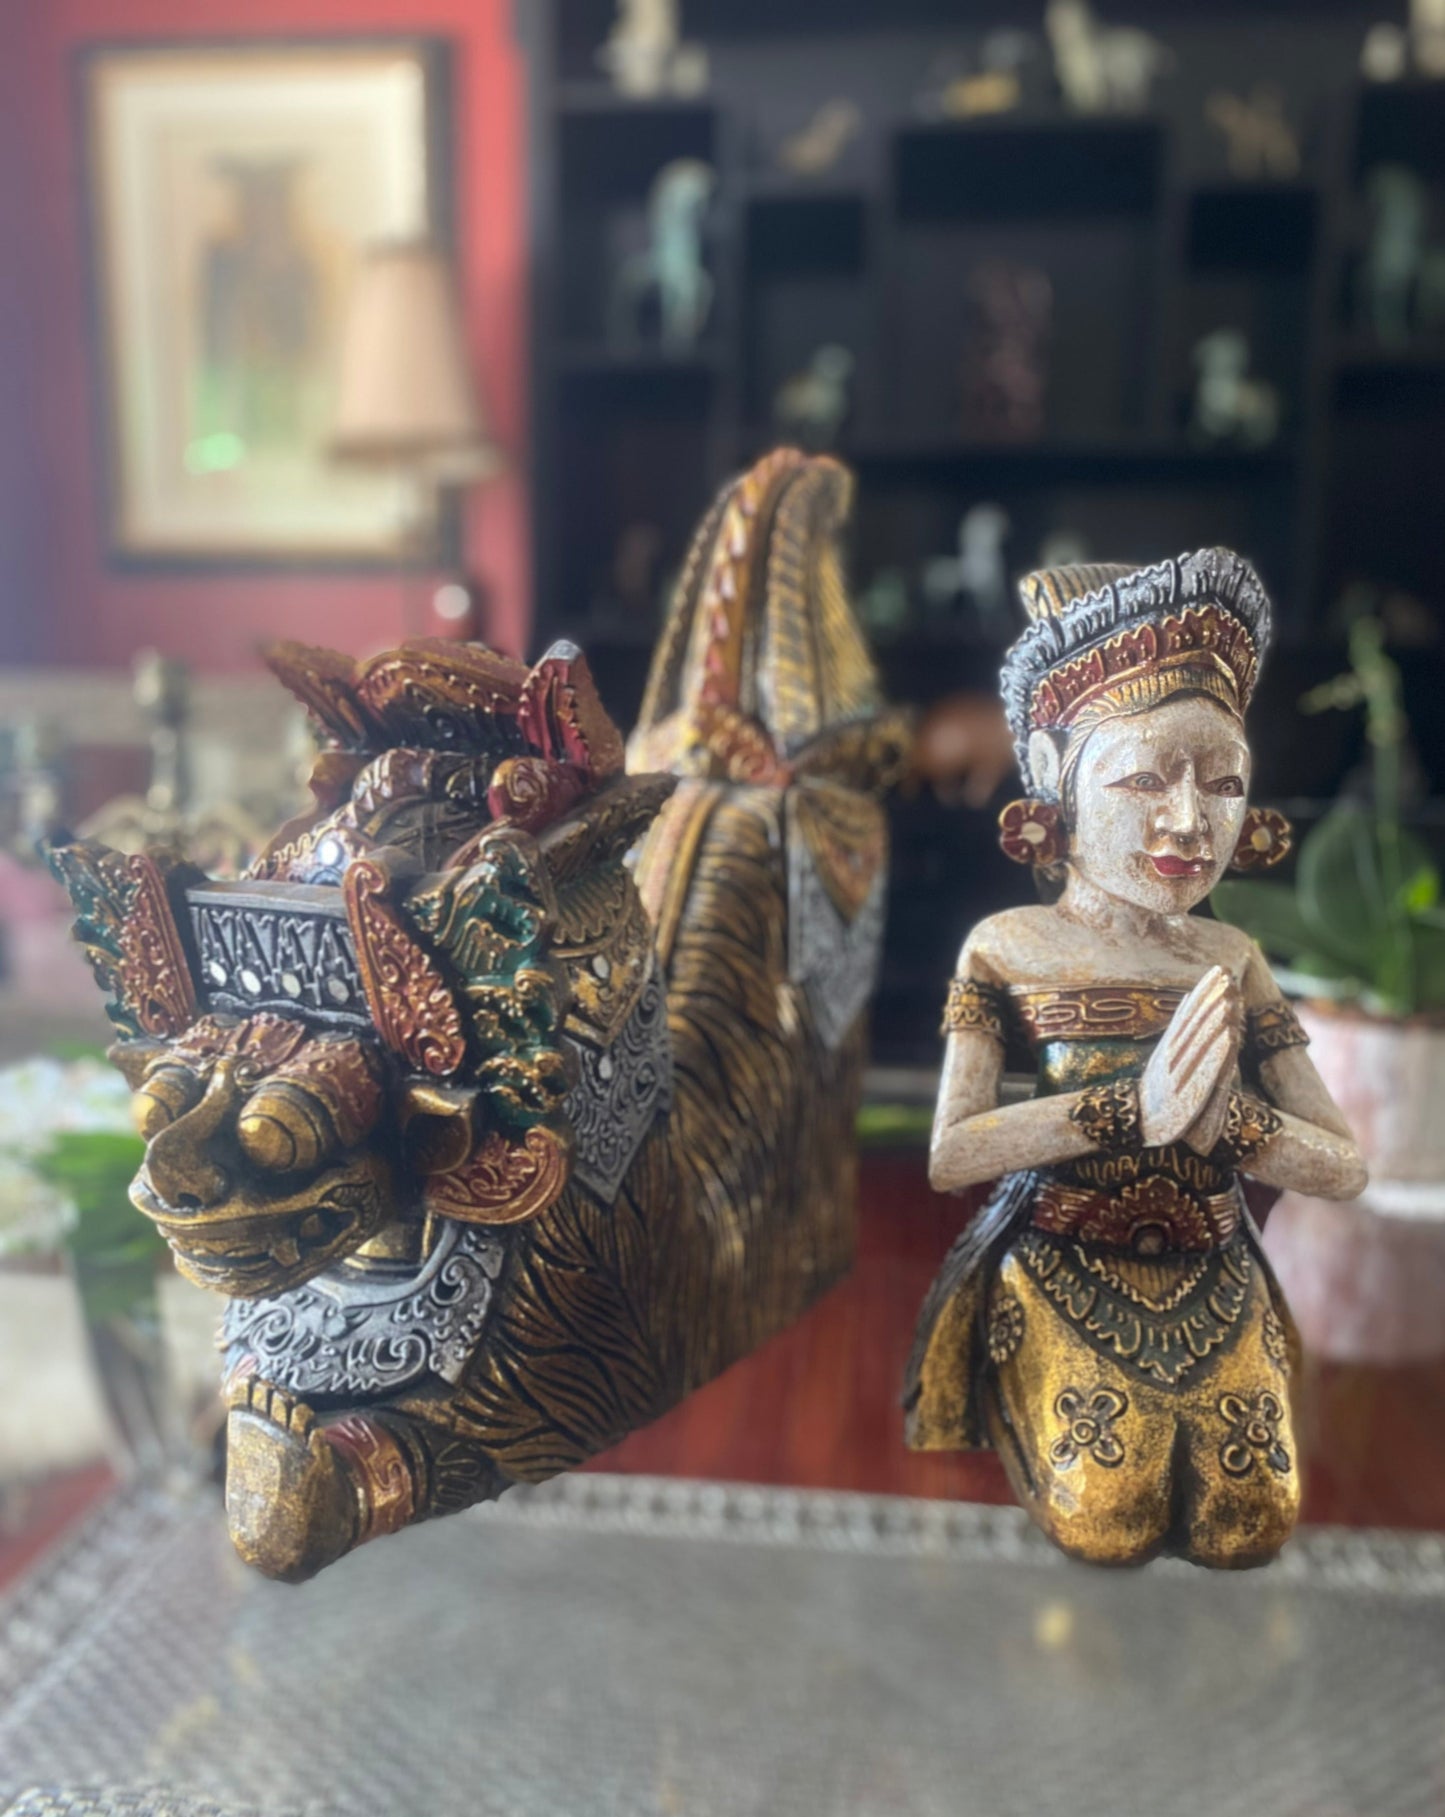 Balinese Wooden Sculpted Statue, The Barong